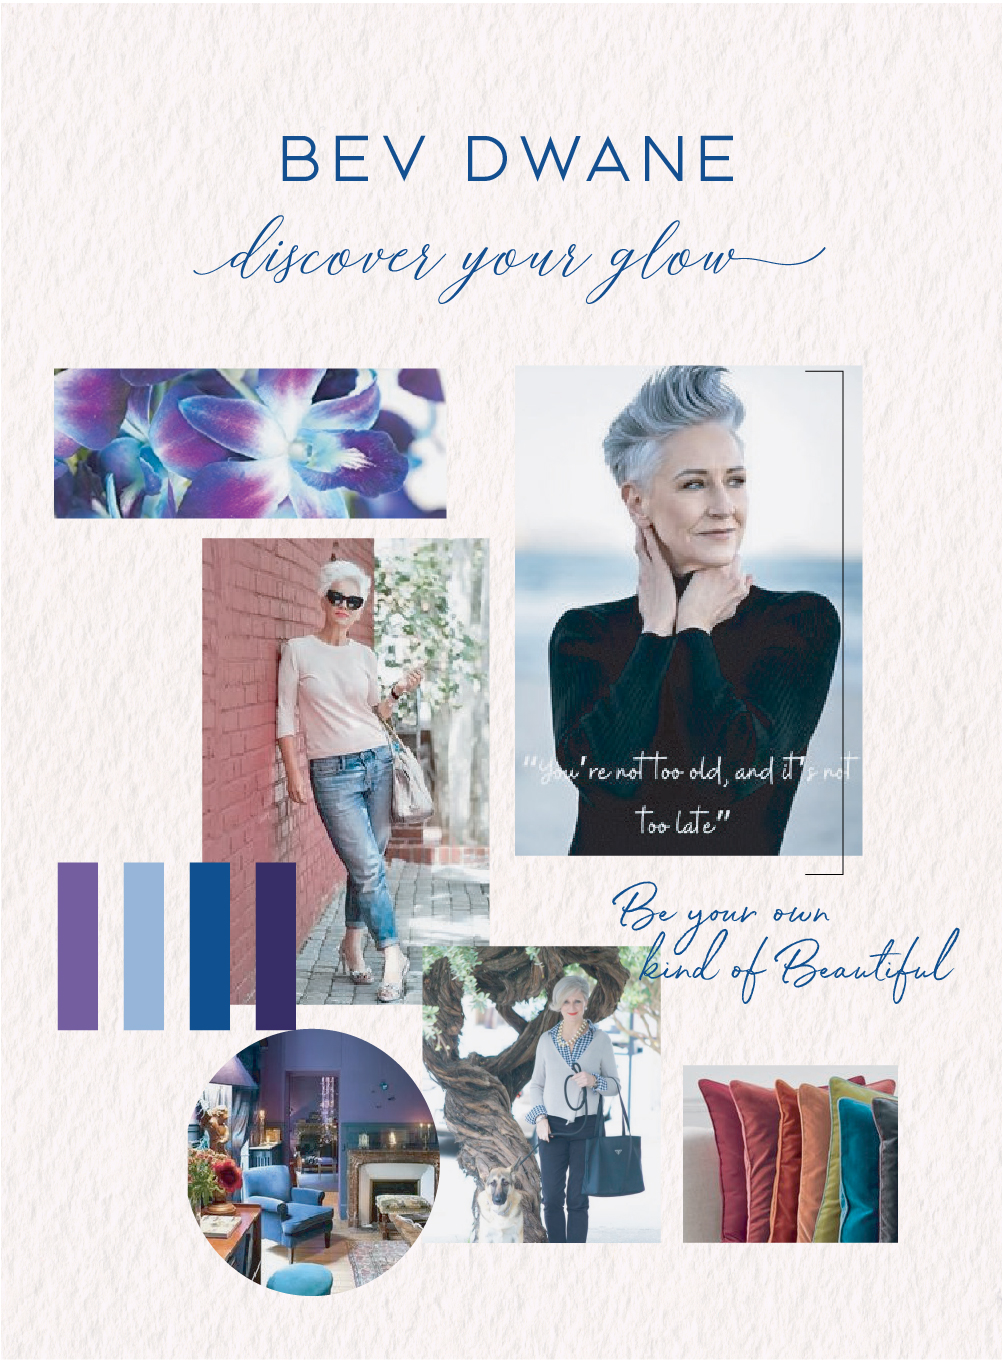 Bev Dwane's Mood Board "You're Not too Old, and it's not too late"